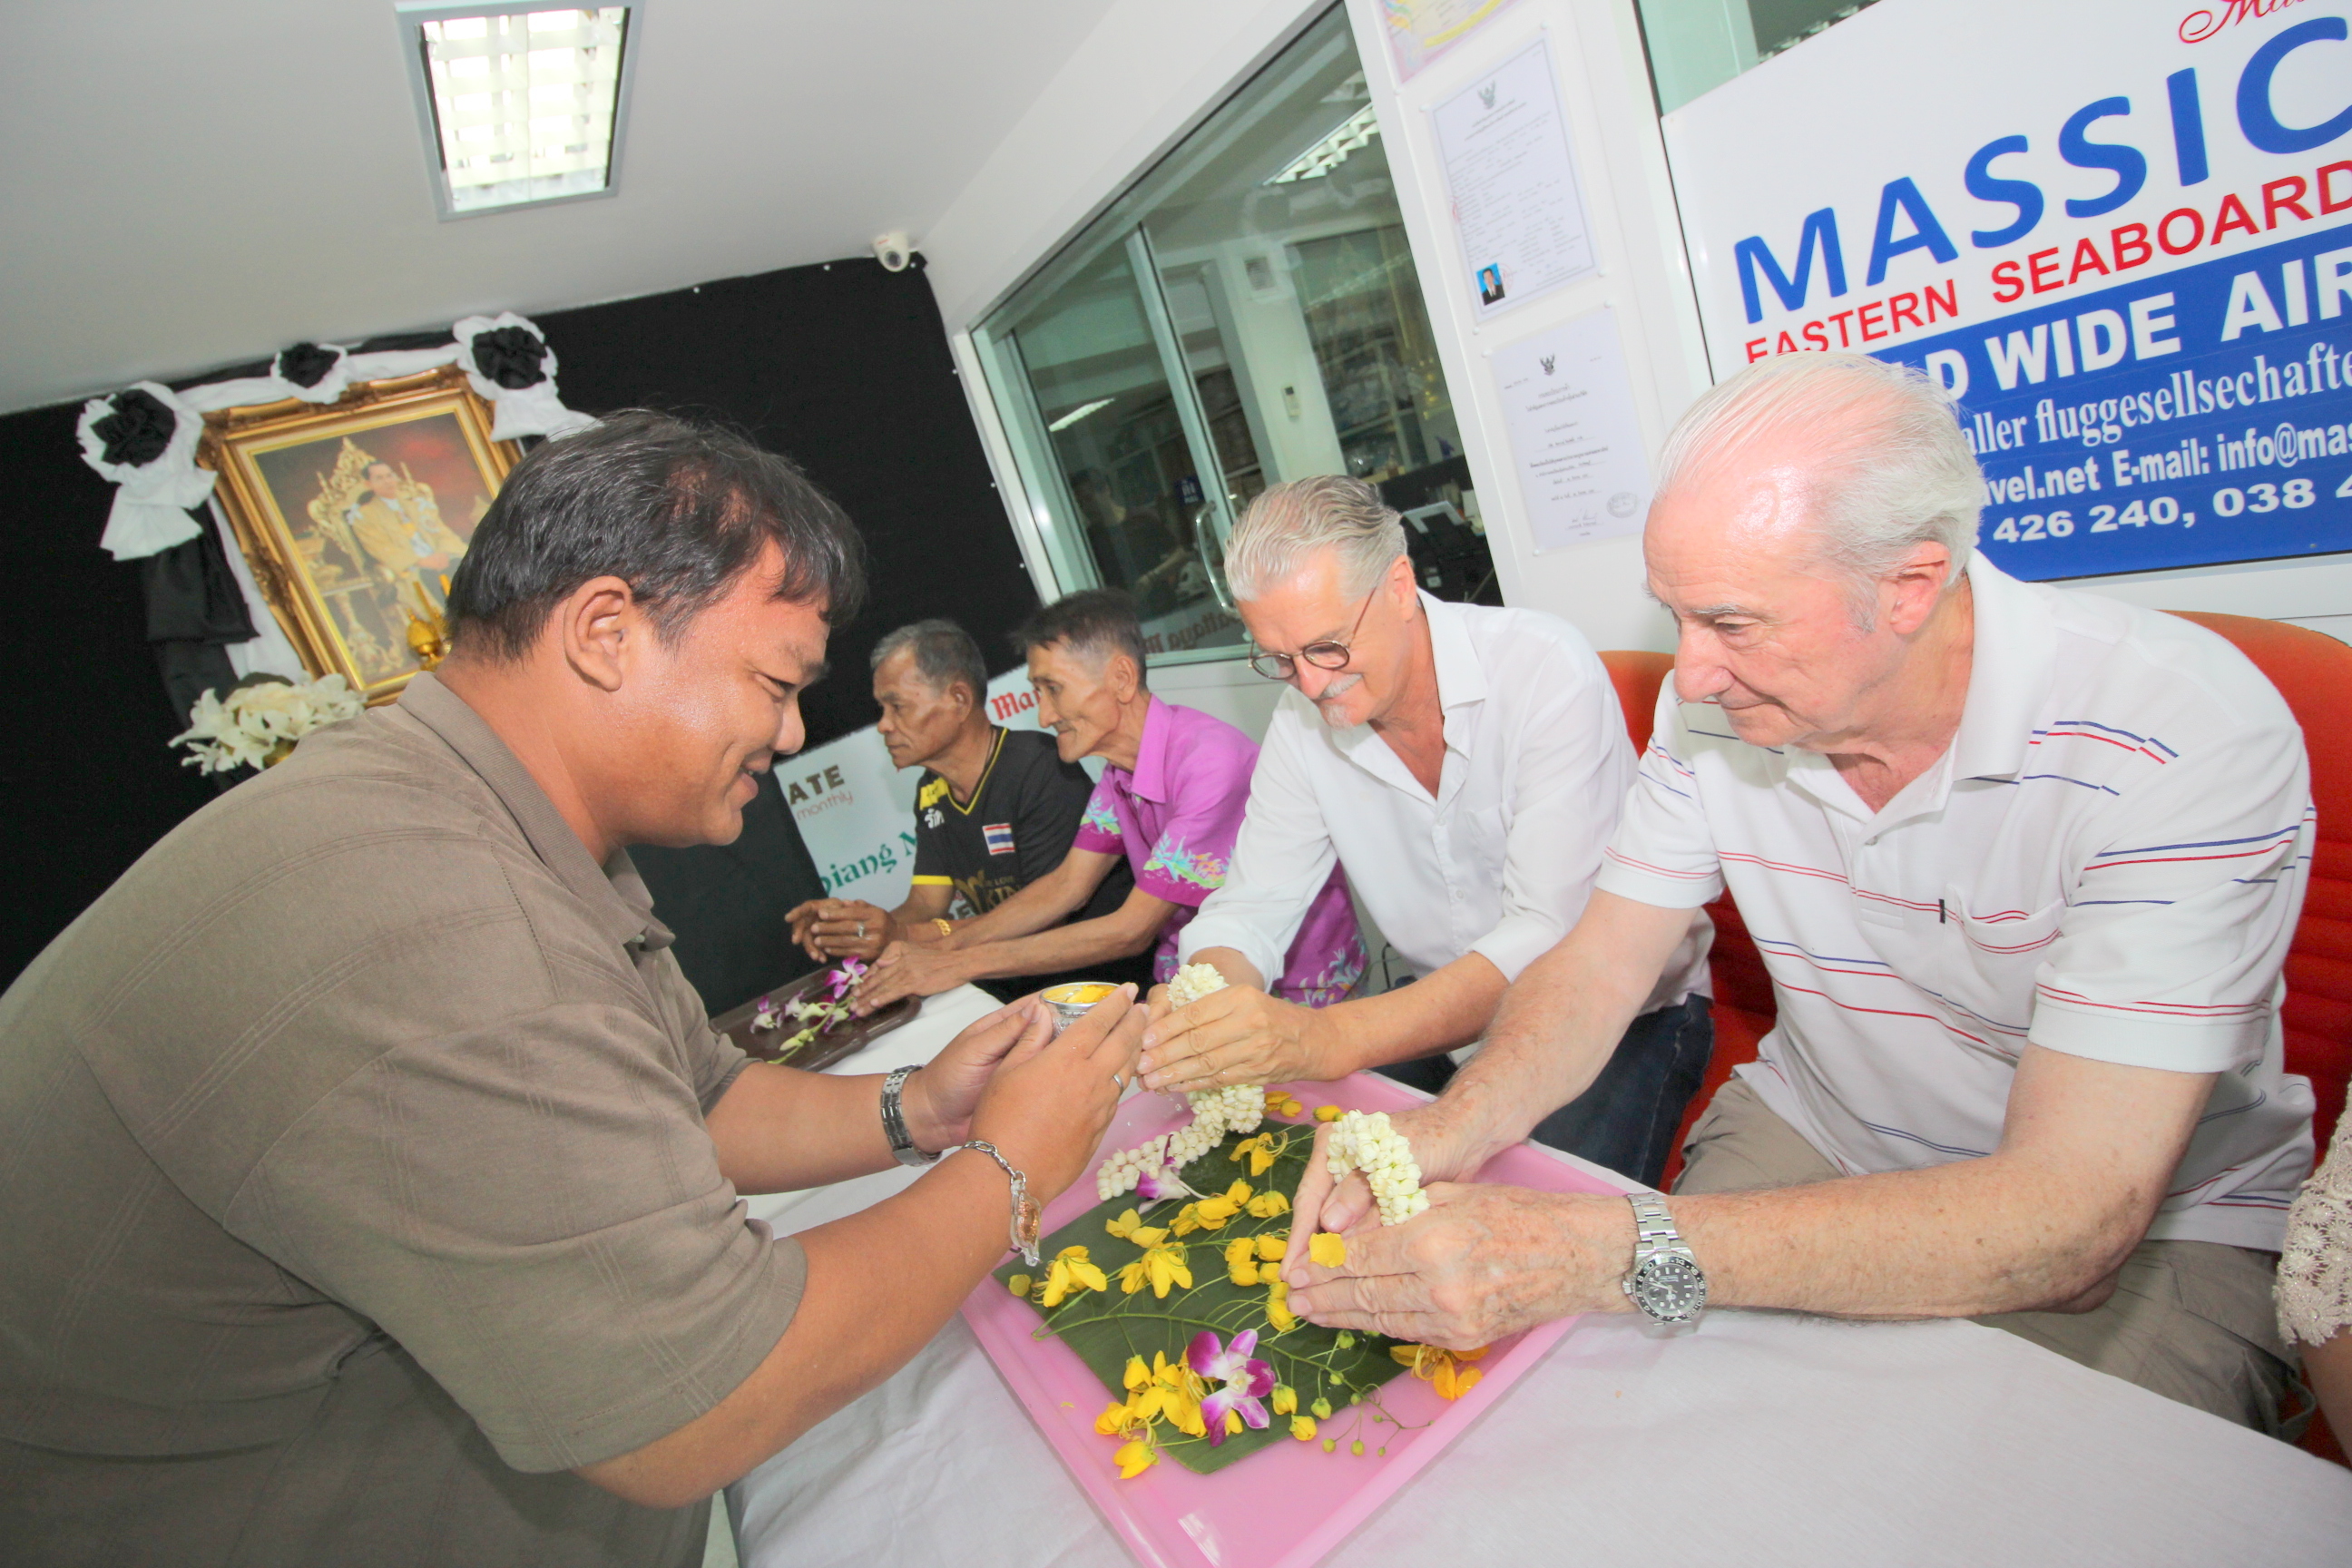 Thanawat Suansuk receives blessings from Jo Klemm and Dr. Iain Corness.